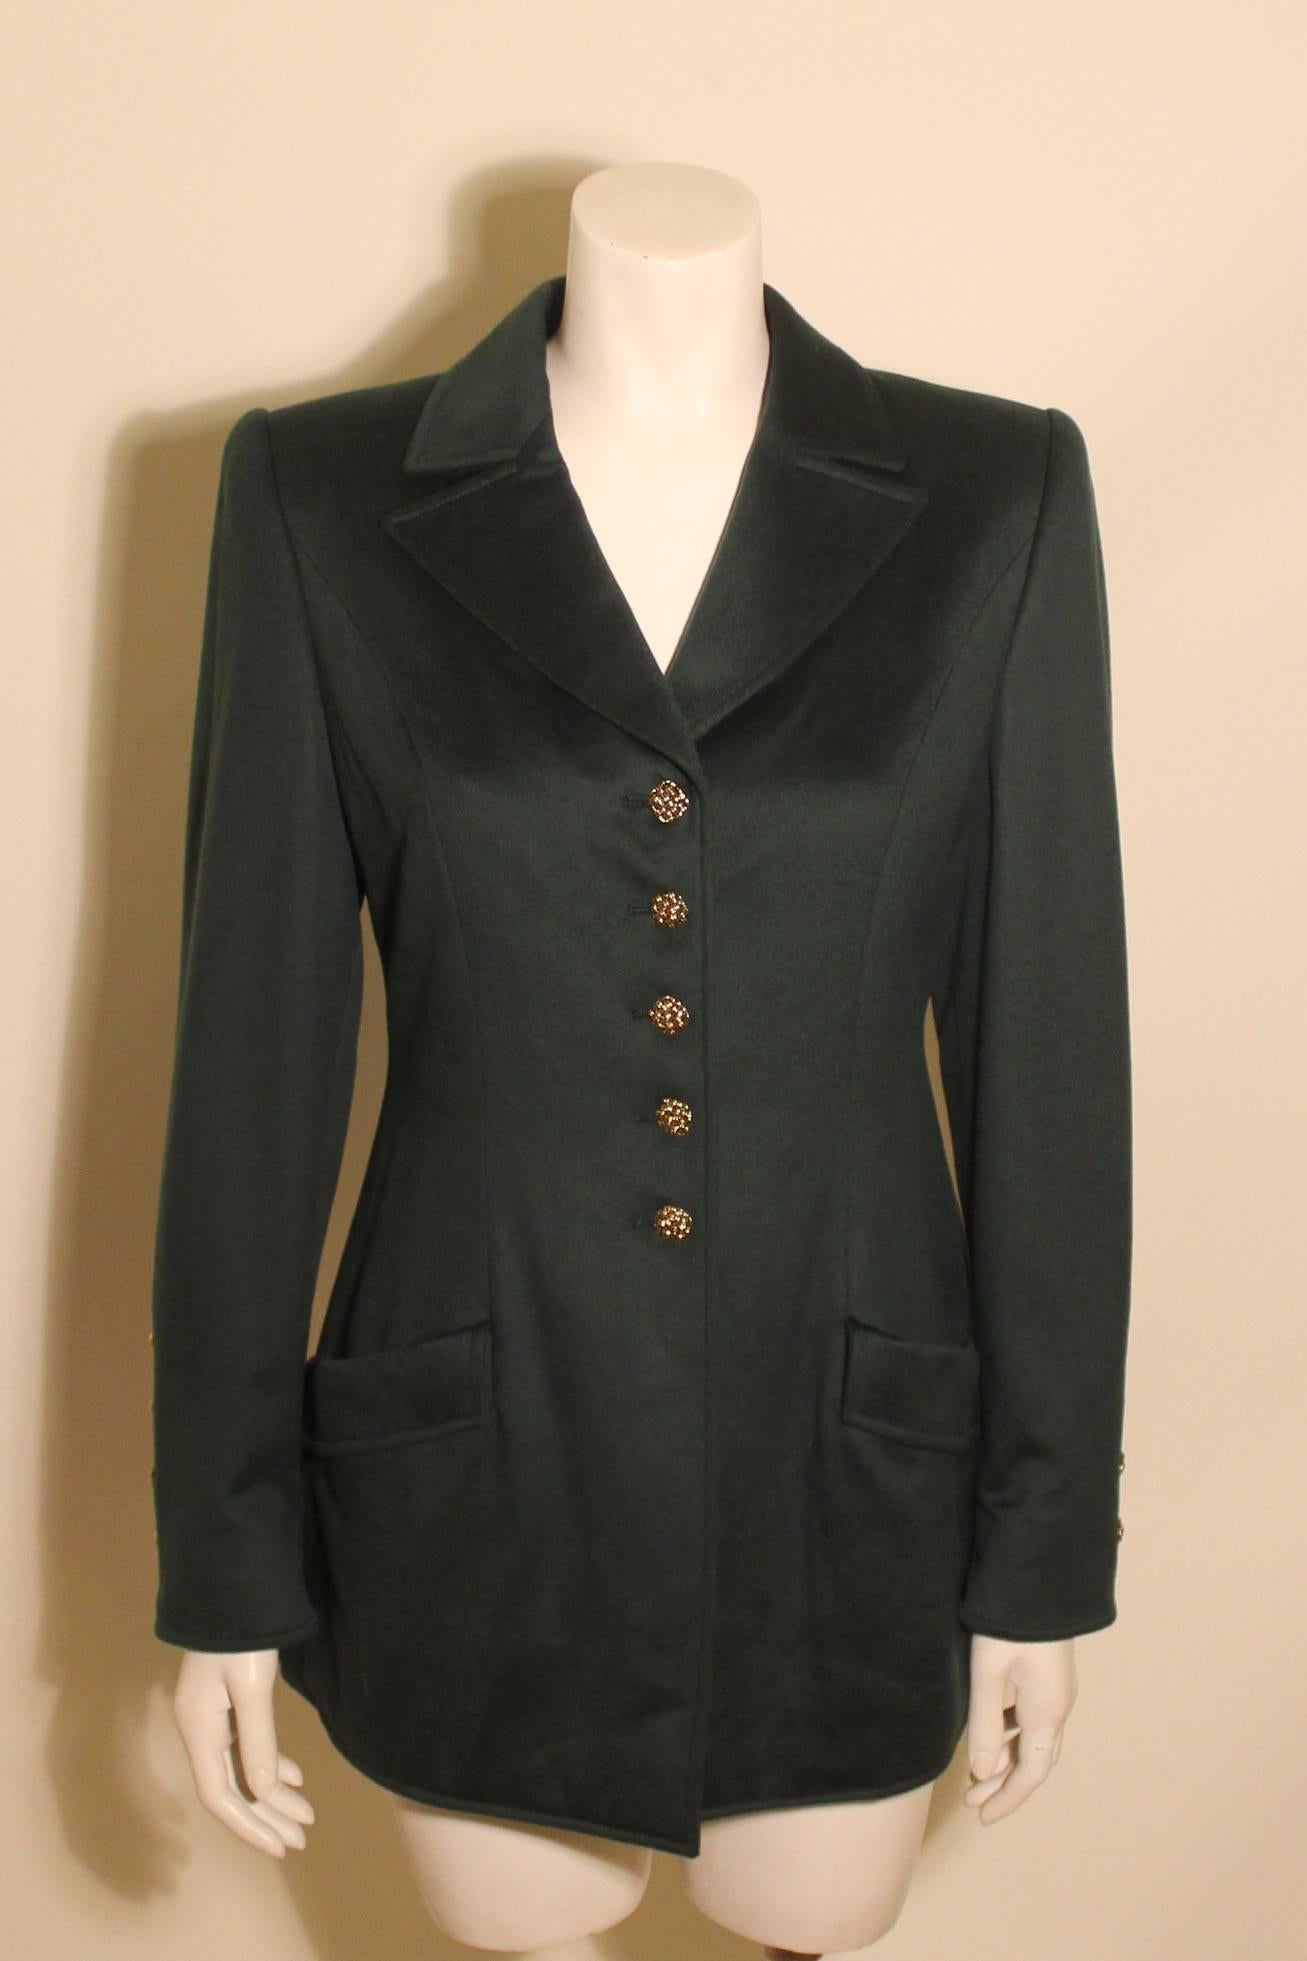 Luxe forest green cashmere jacket from Valentino with gold tone basket weave style metal buttons on the front & cuffs. There are two pockets at the hip.